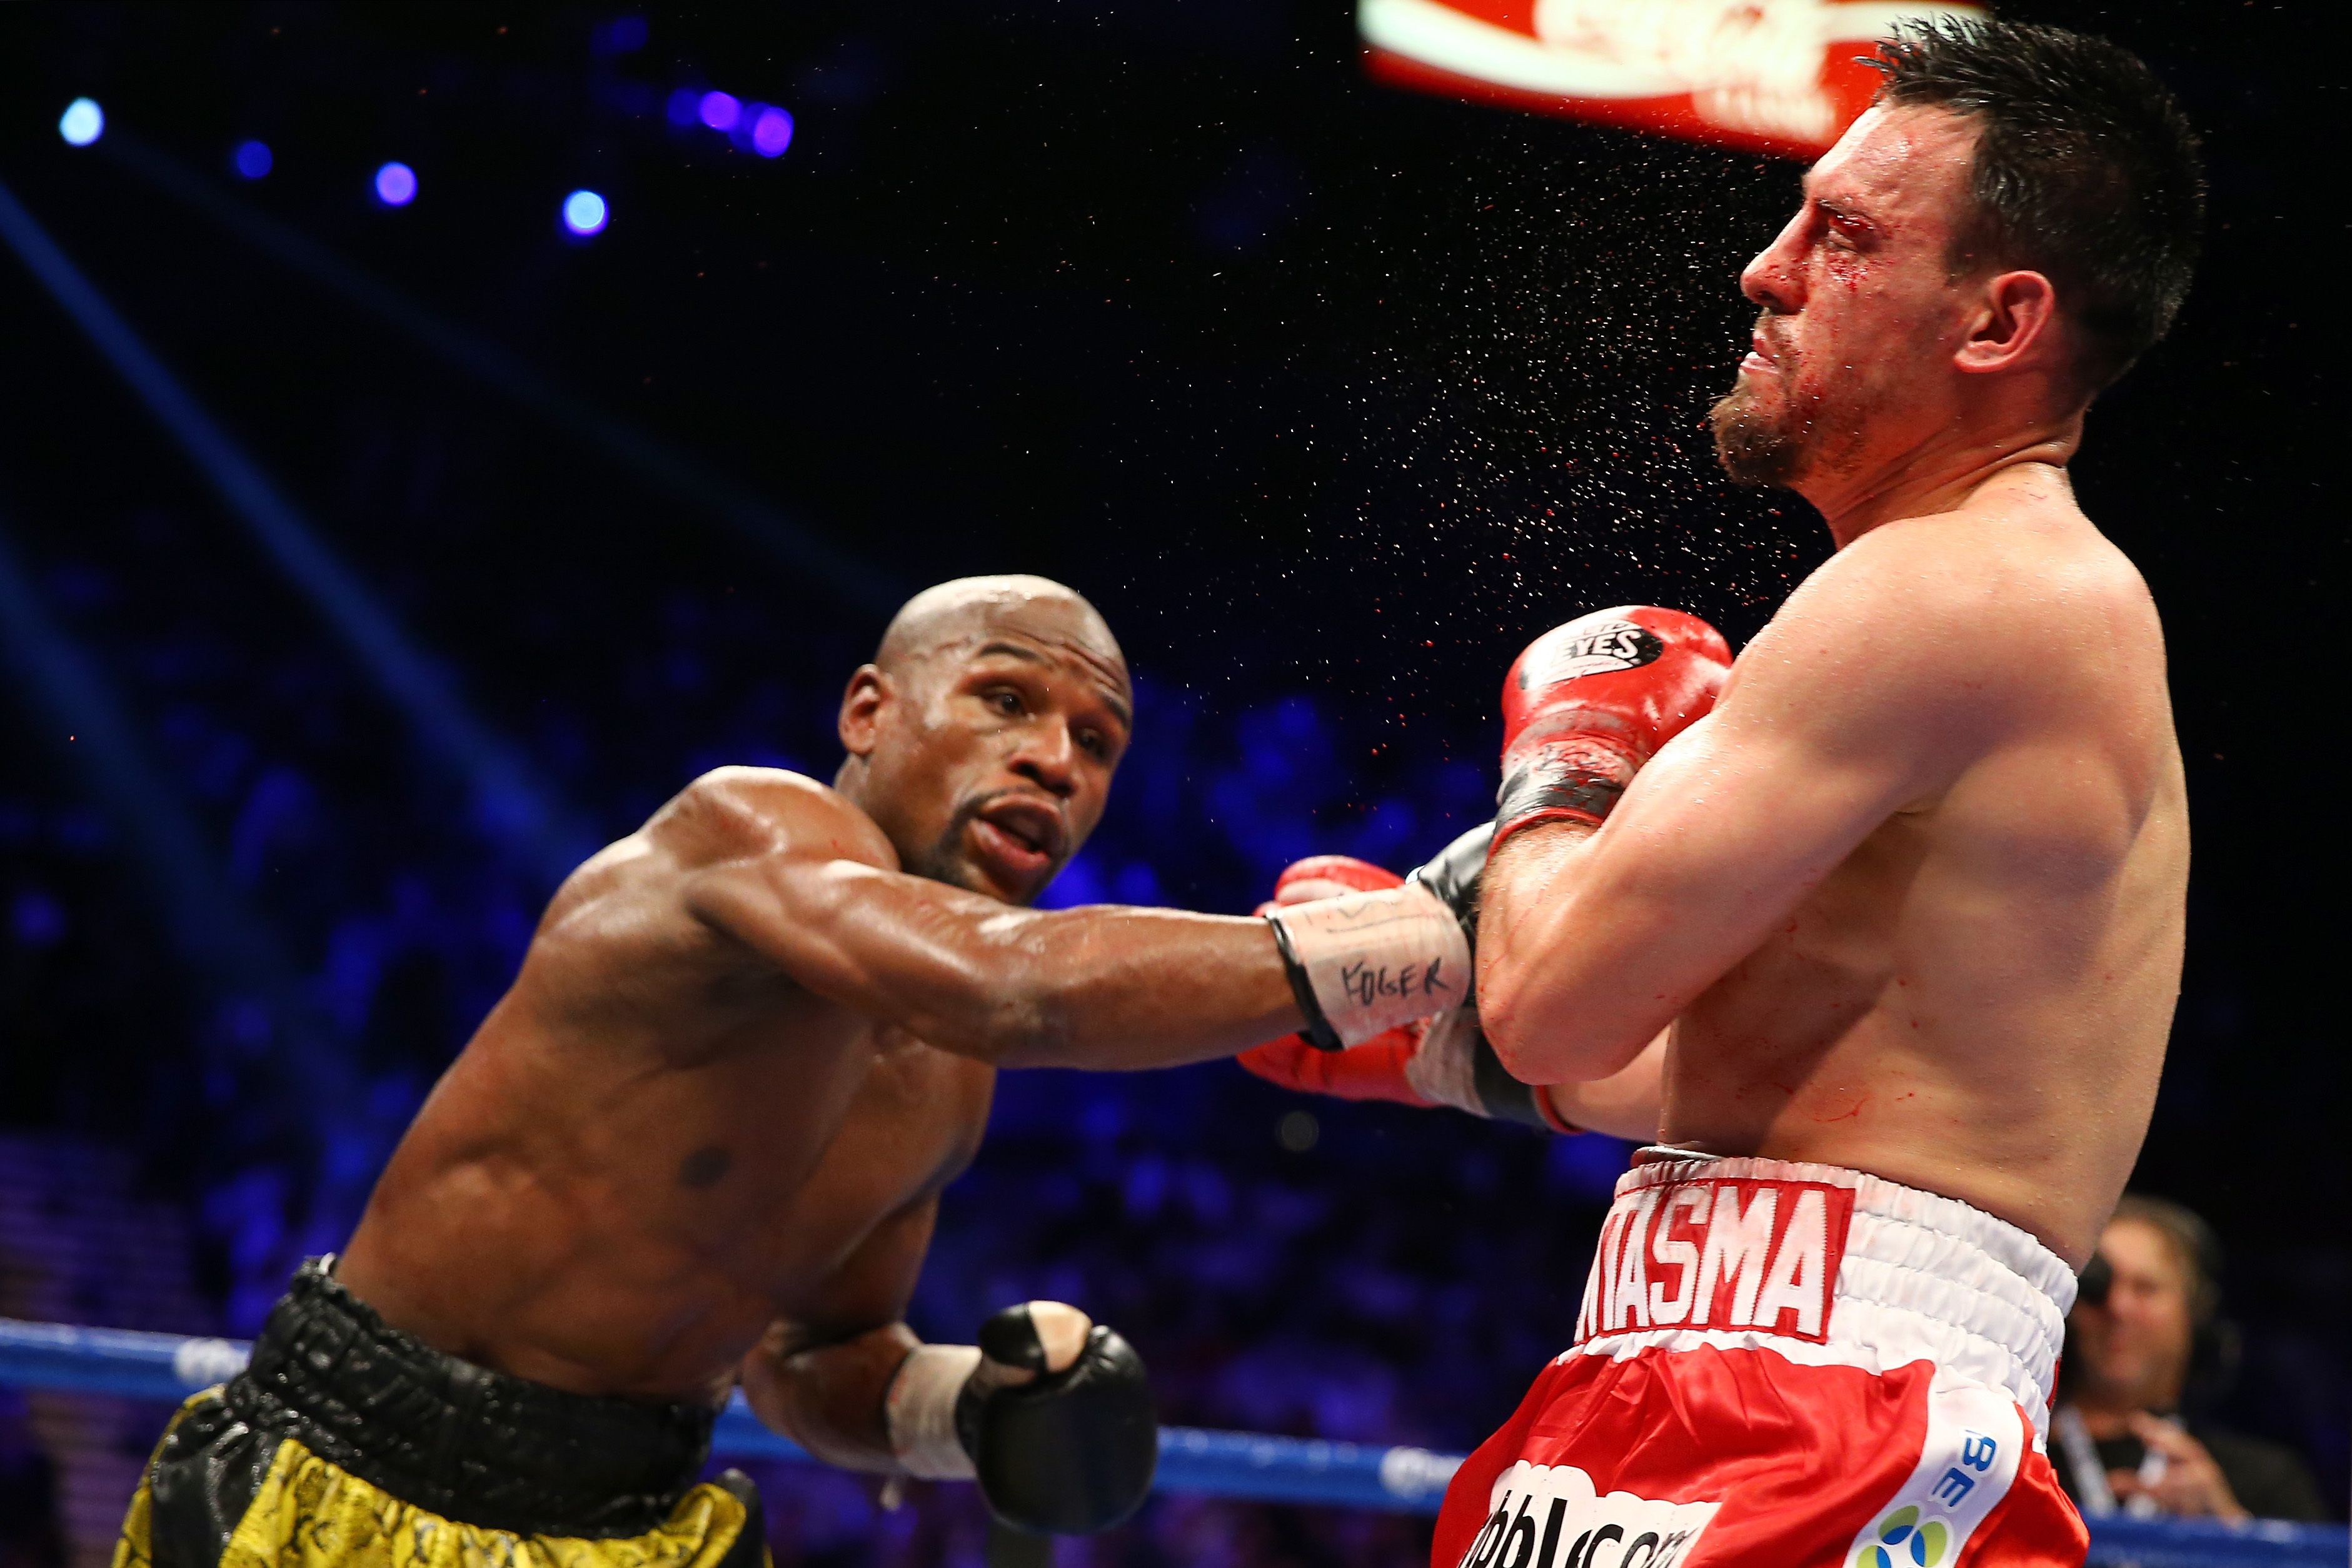 Floyd Mayweather Jr in the ring wallpapers and images - wallpapers